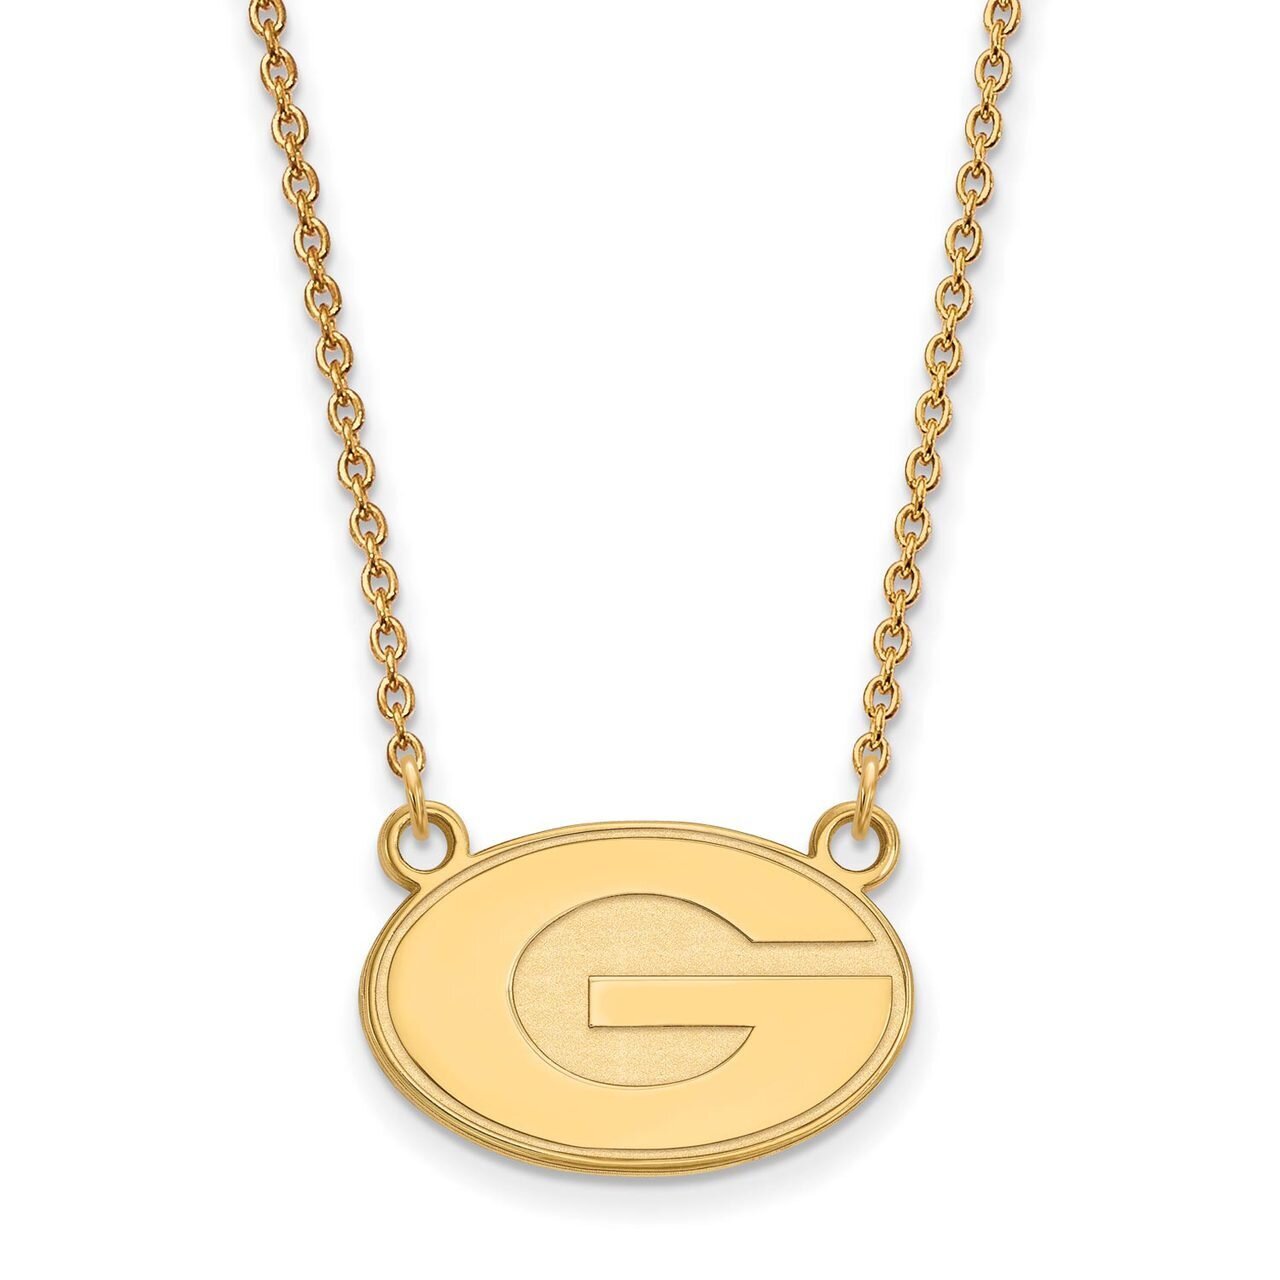 University of Georgia Small Pendant with Chain Necklace 10k Yellow Gold 1Y015UGA-18